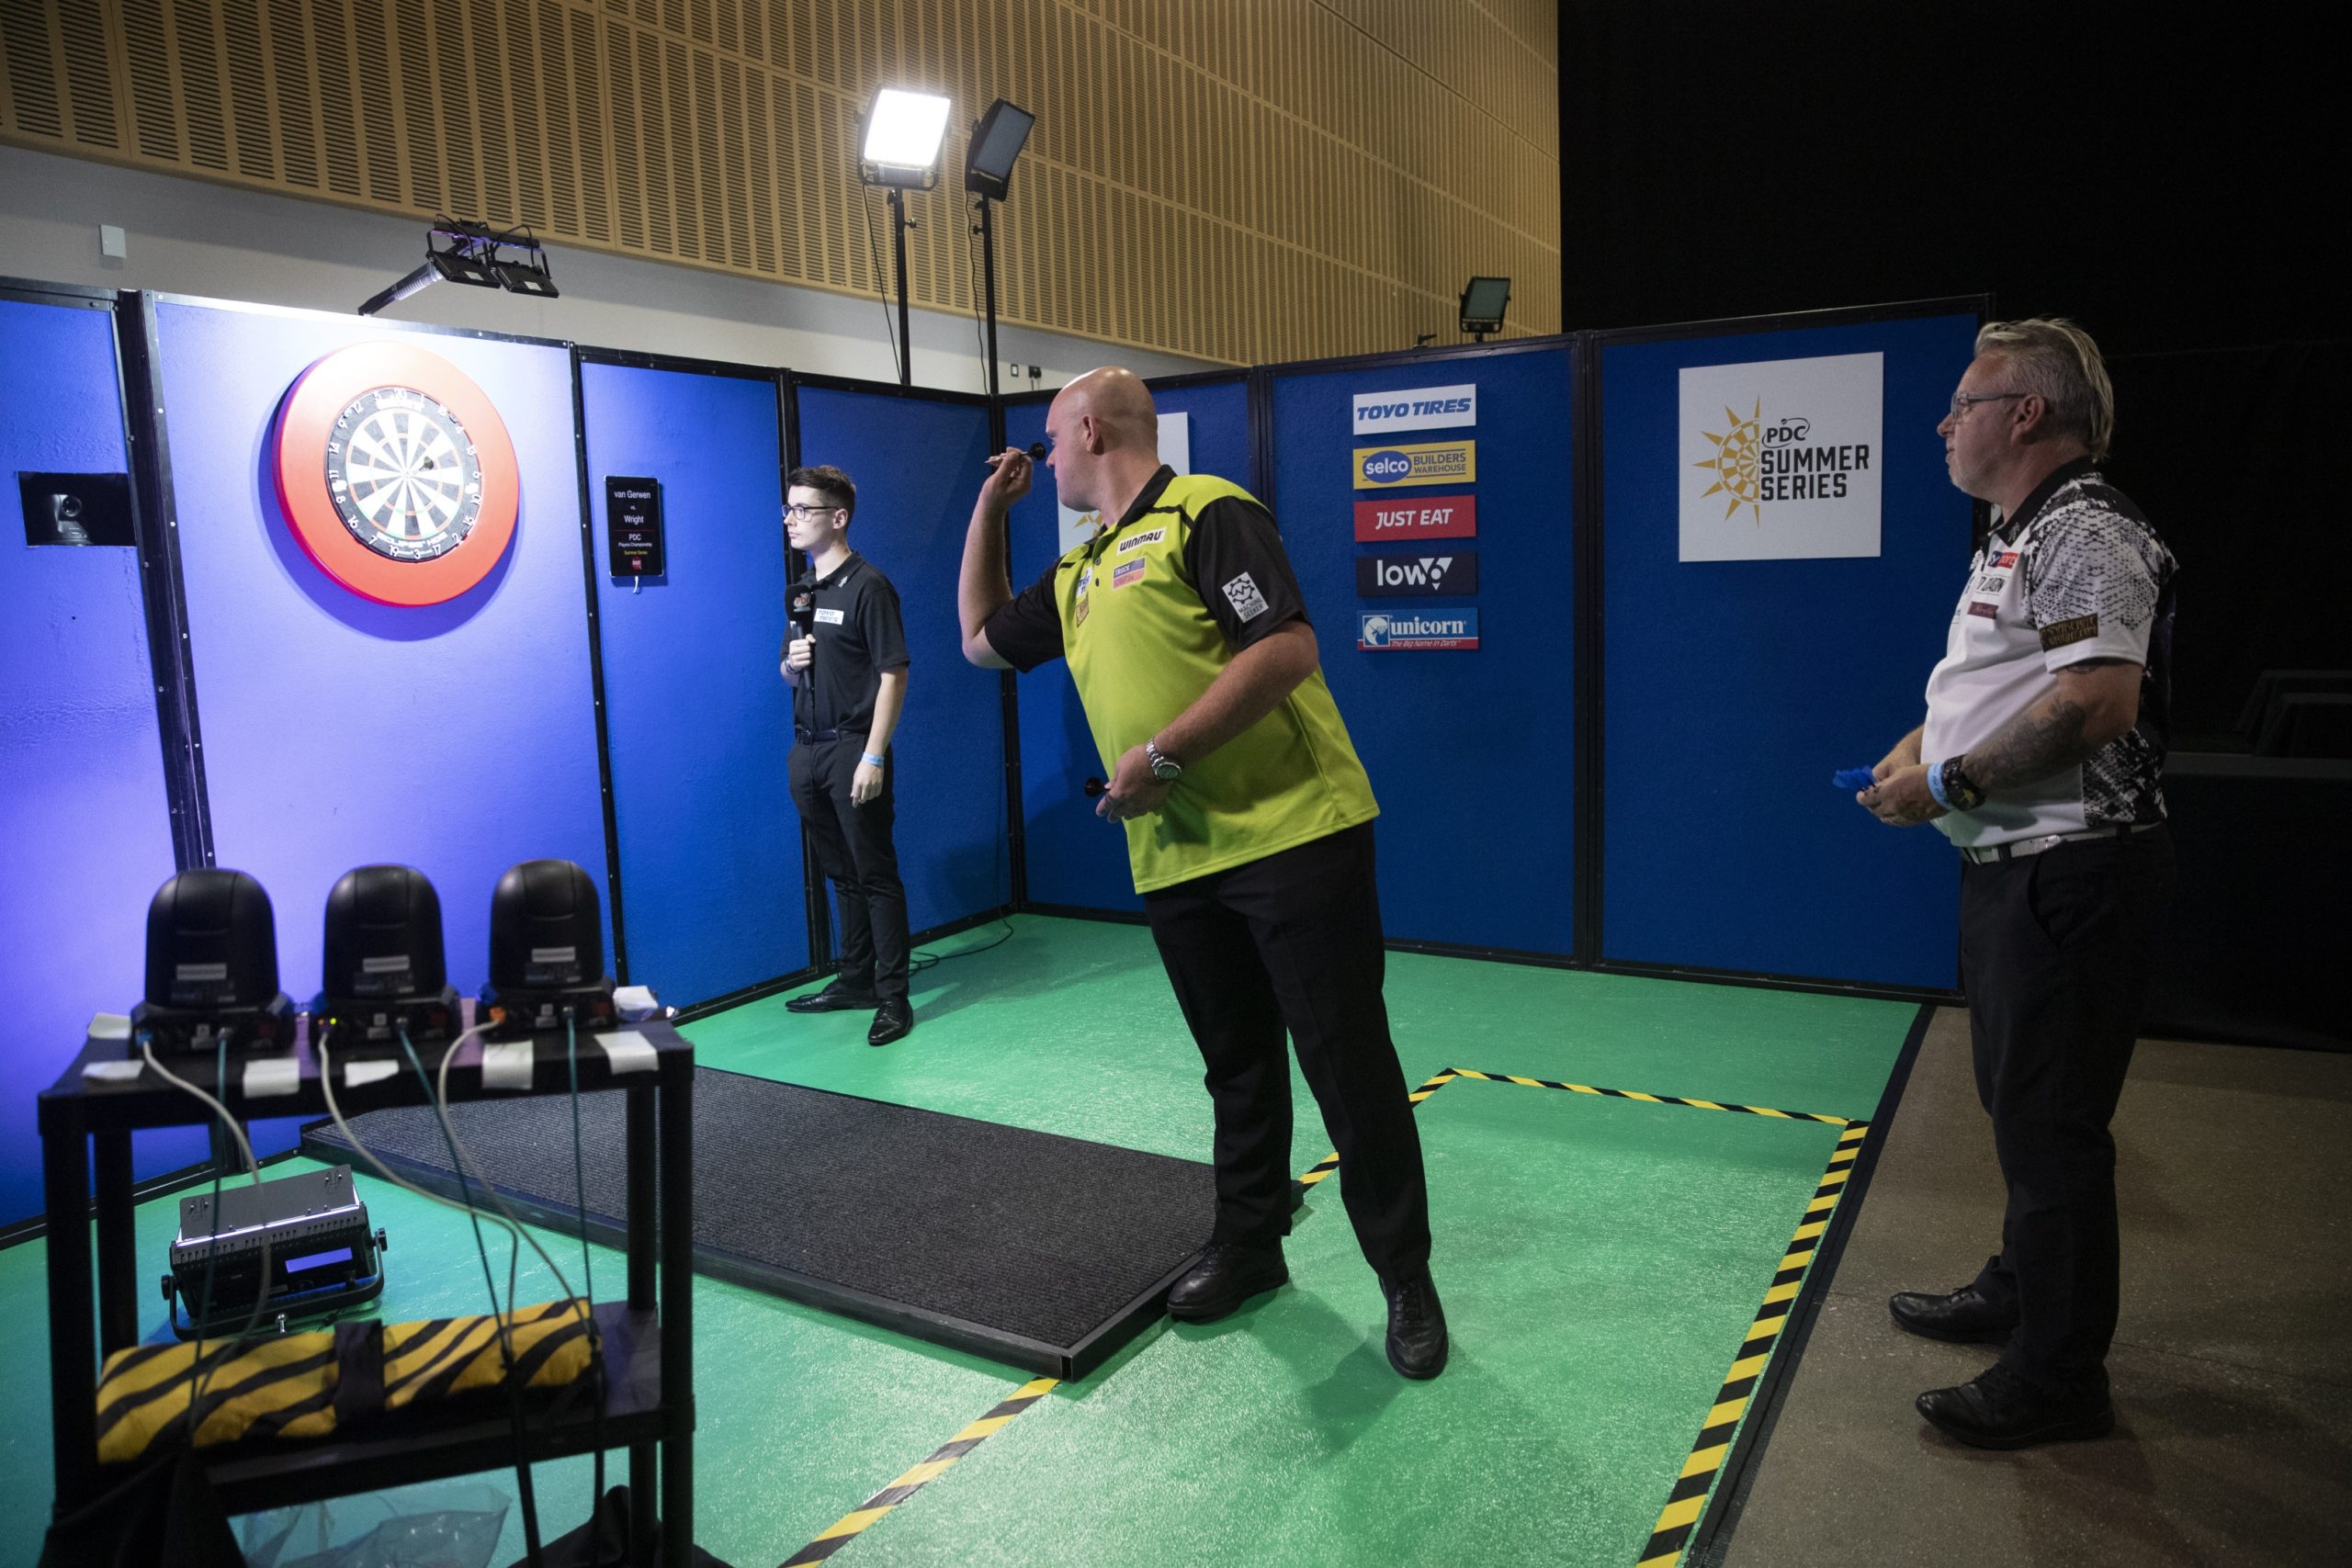 How To Watch The PDC Winter Series